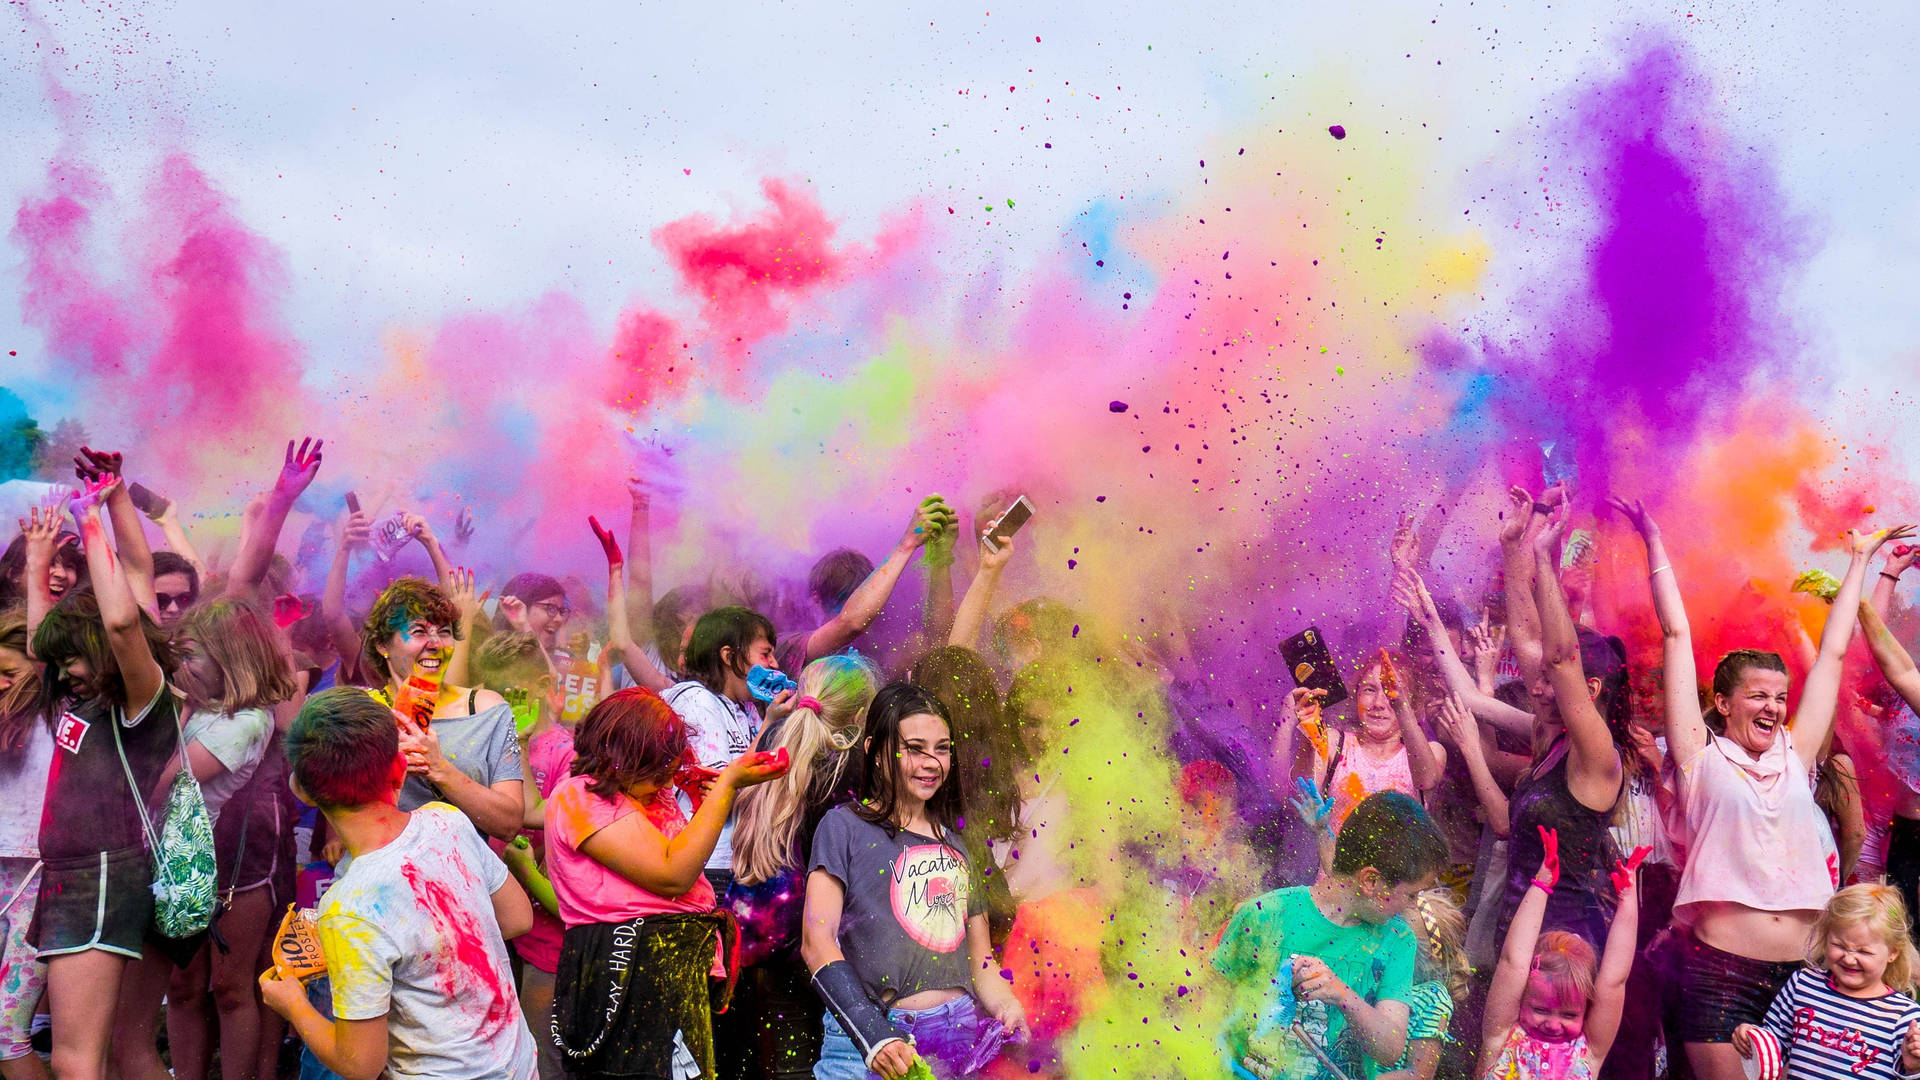 Group Of People In A Color Run Wallpaper